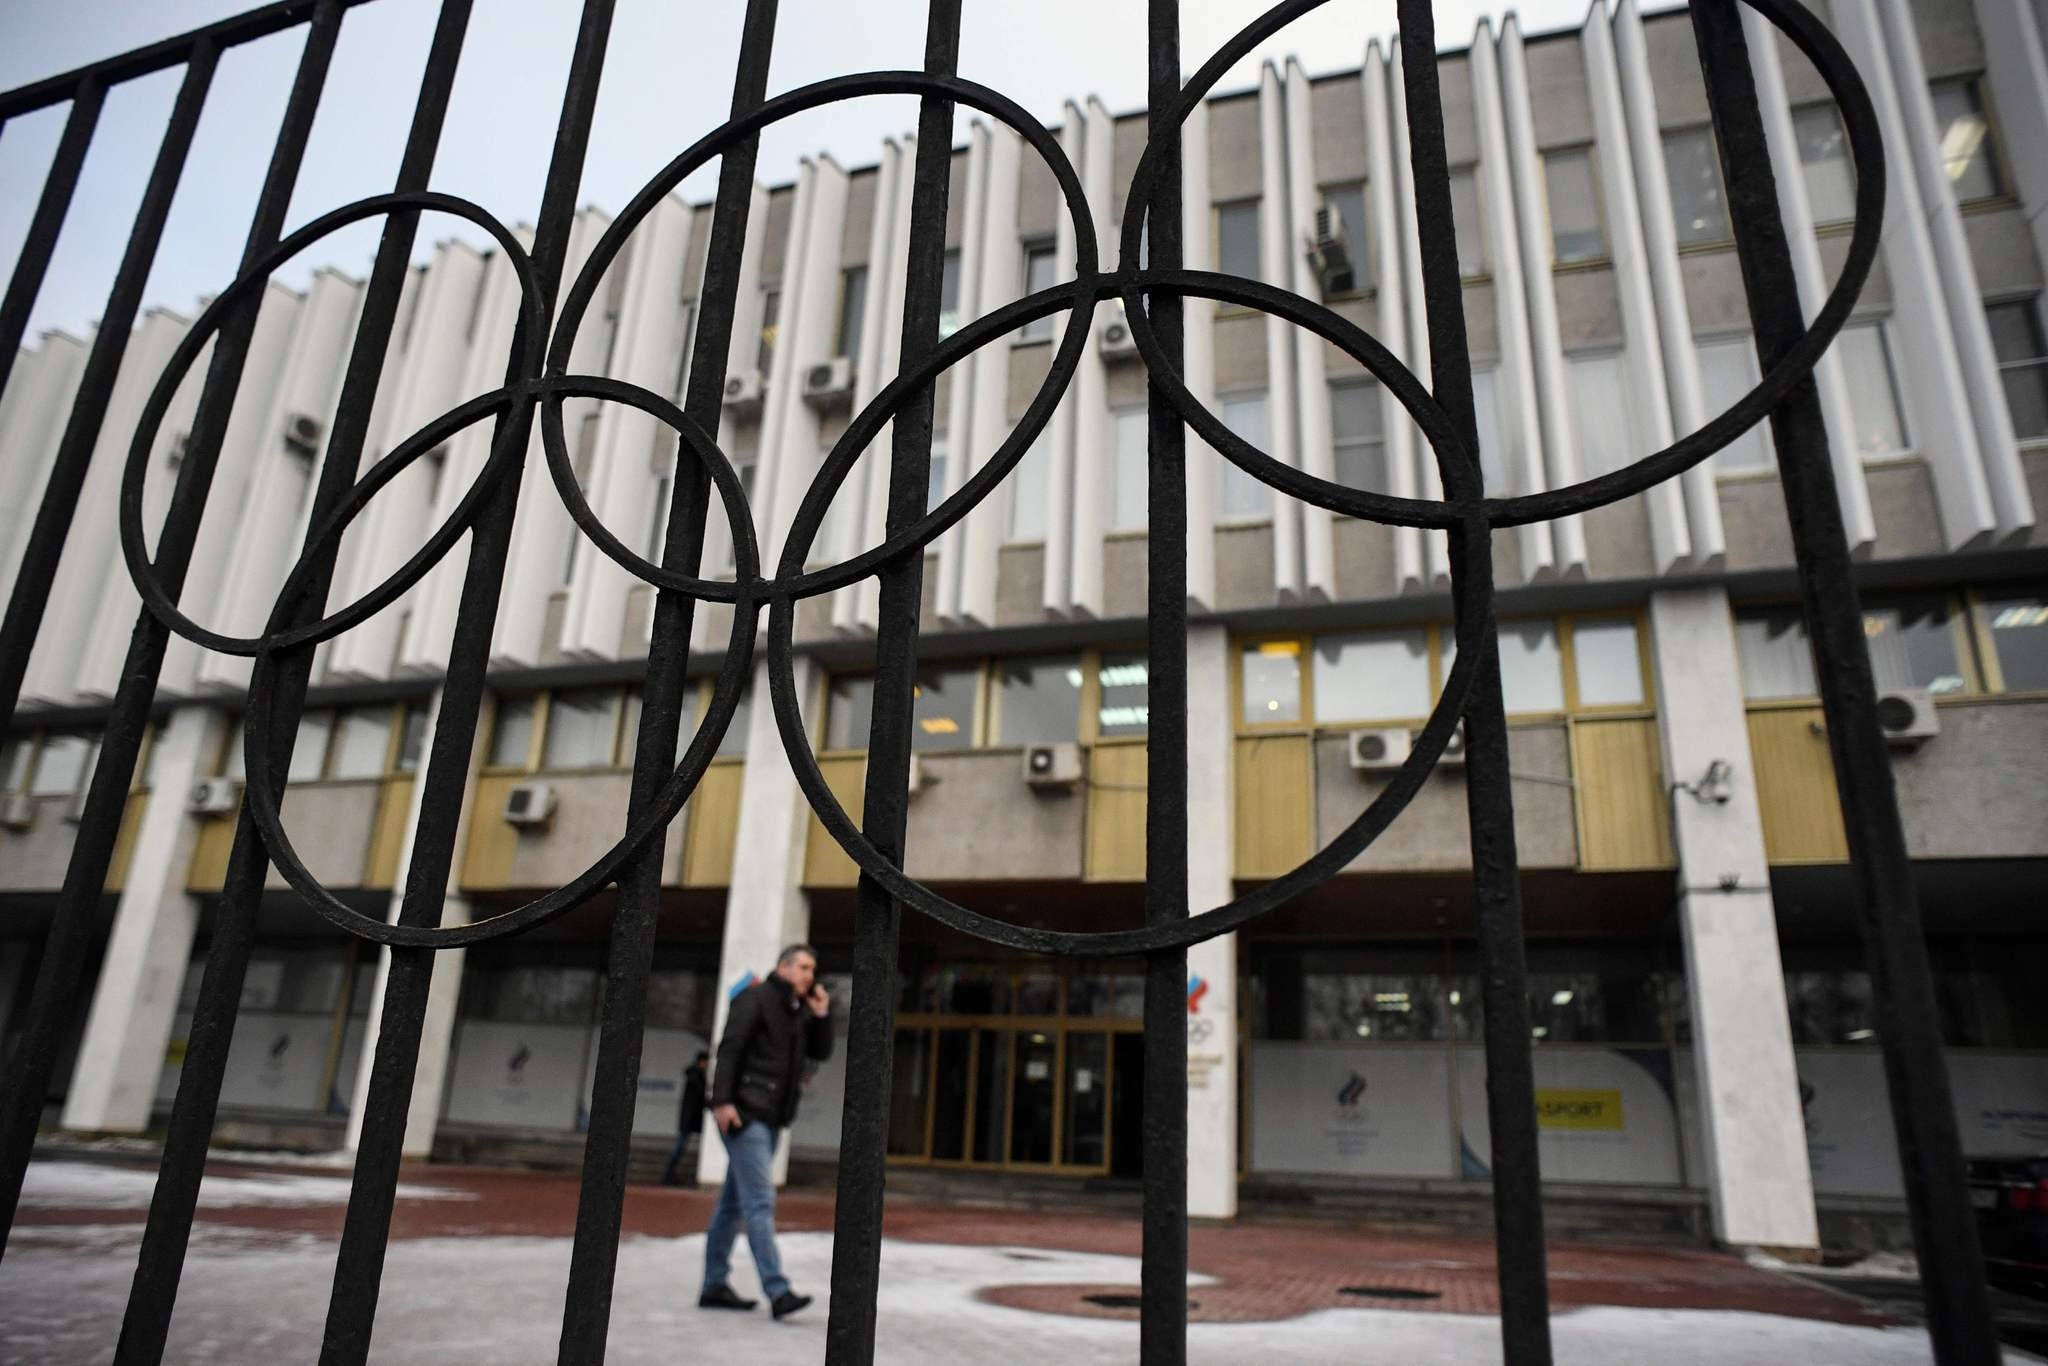 28 Russian athletes have their Olympic doping bans overturned | Daily Sabah